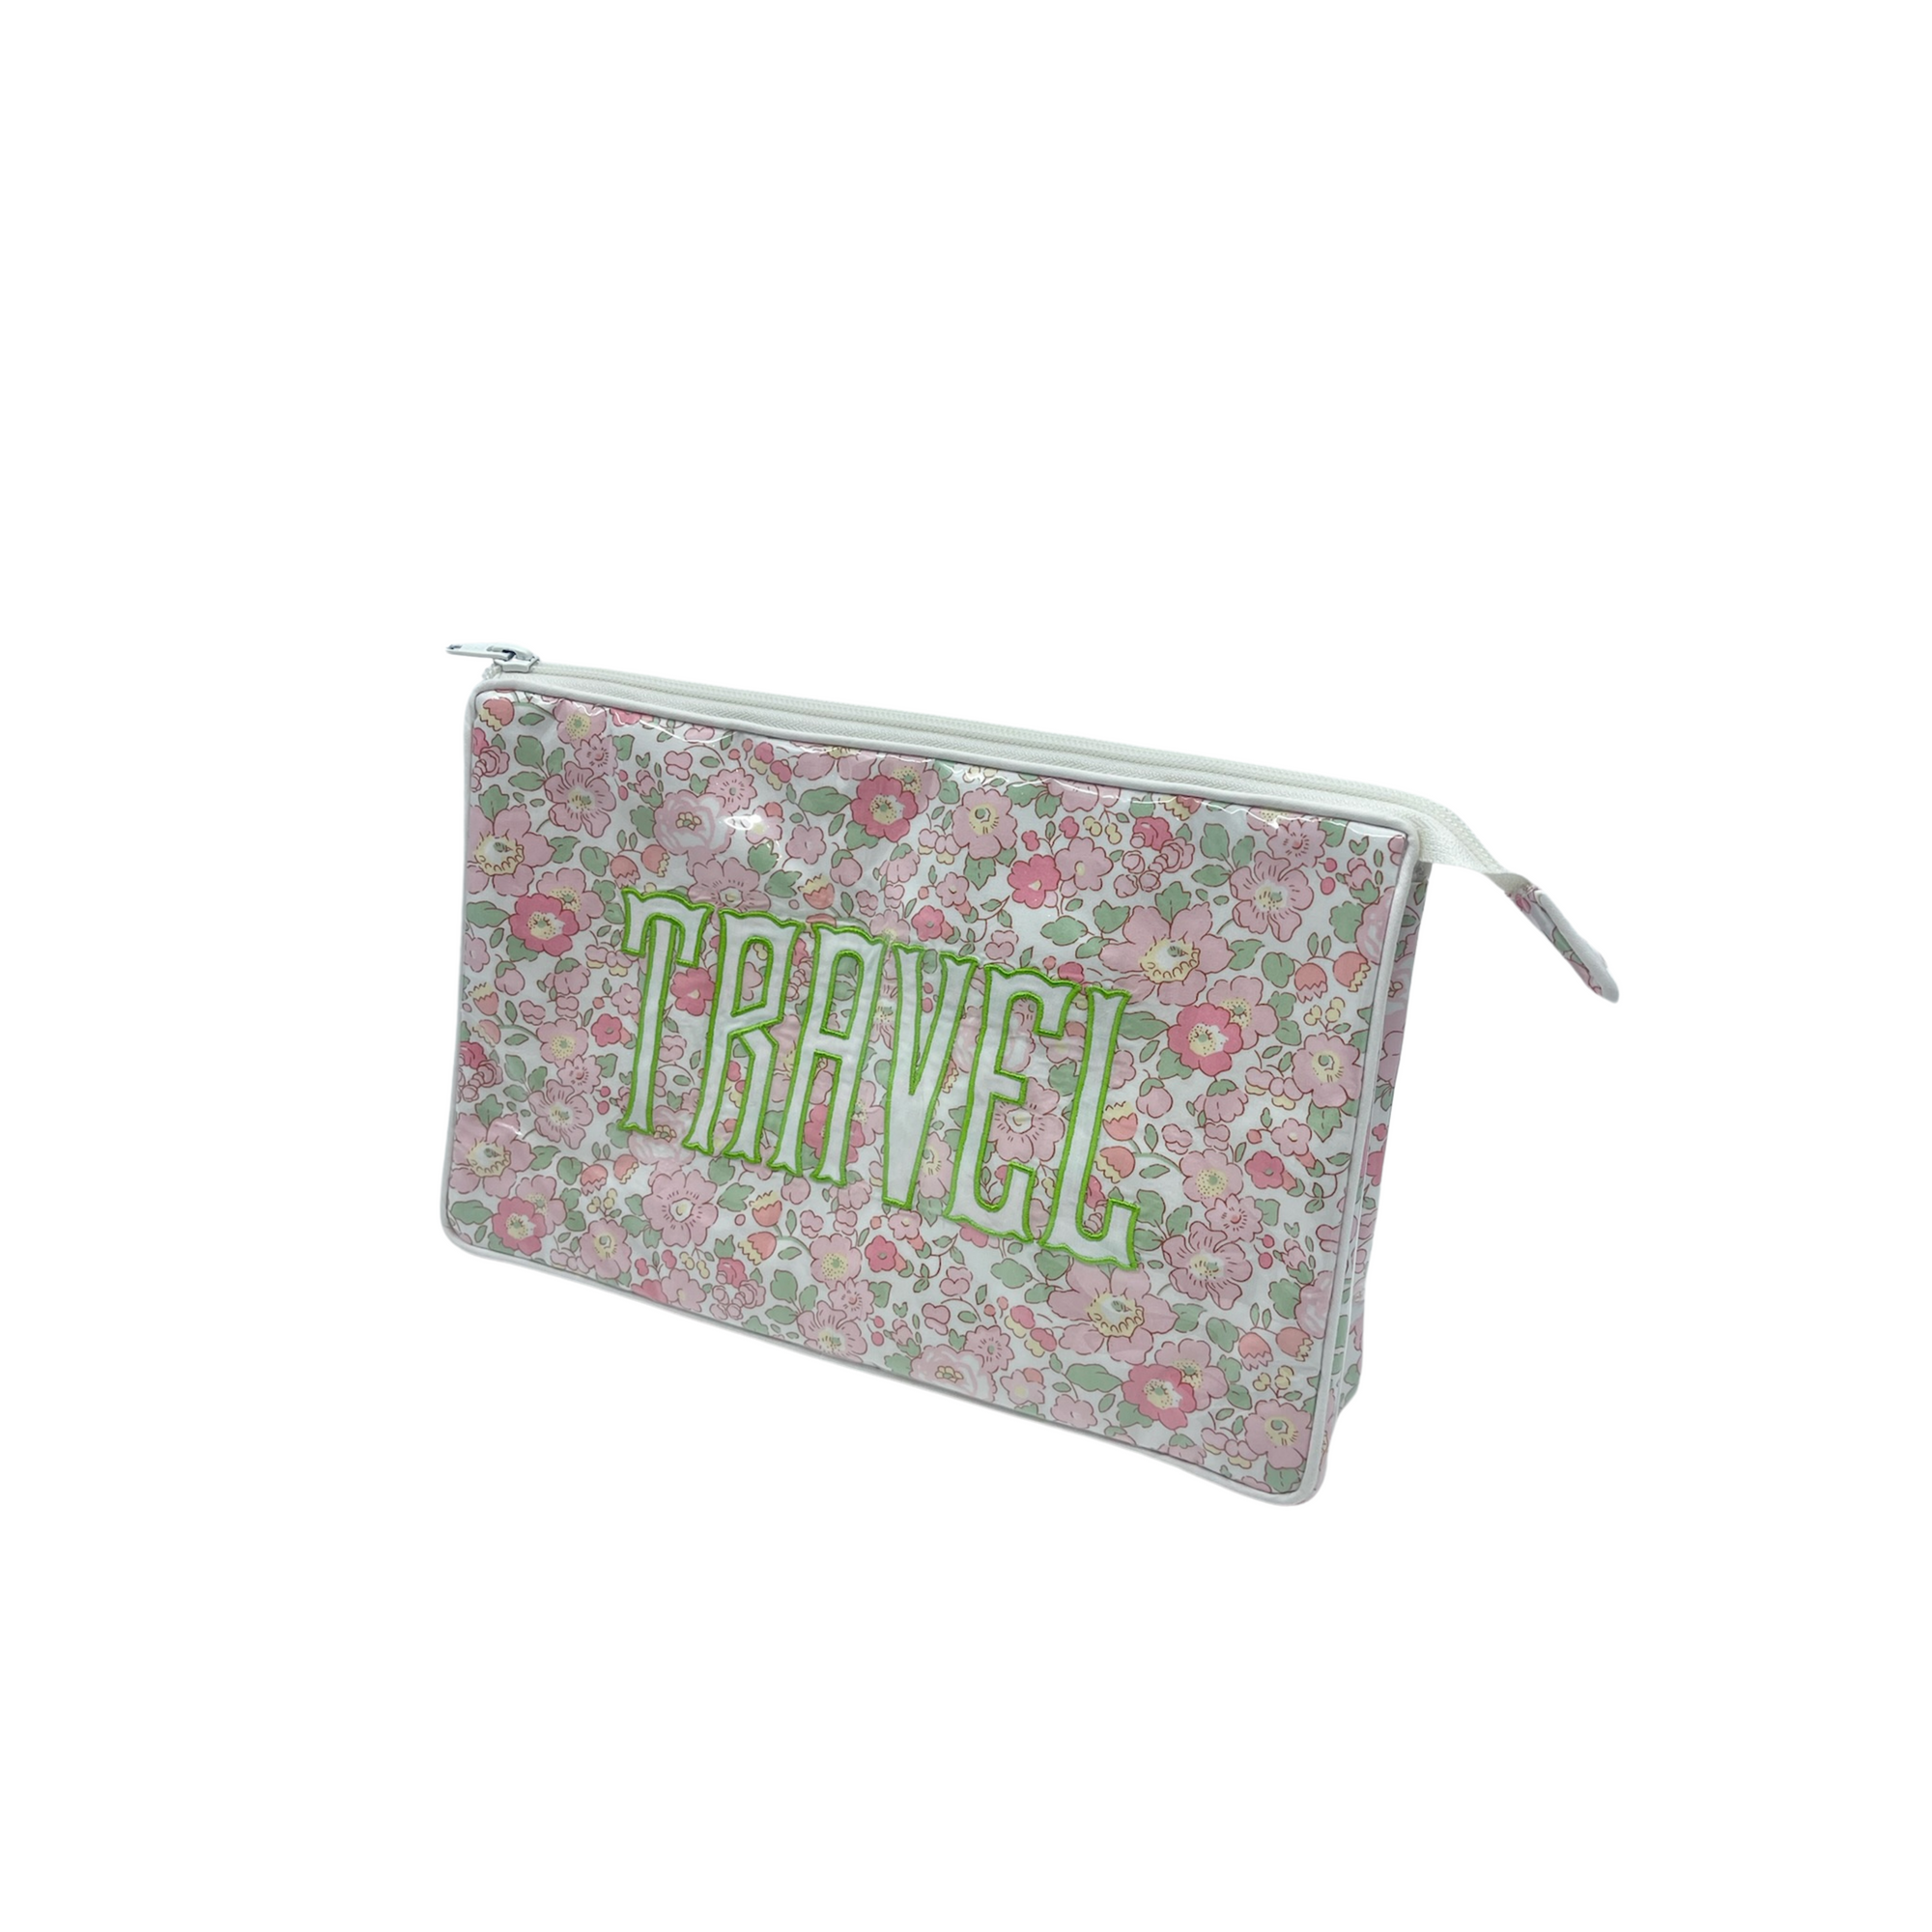 Travel Large Helen Cosmetic Case, Liberty, Betsy Peach Blossom